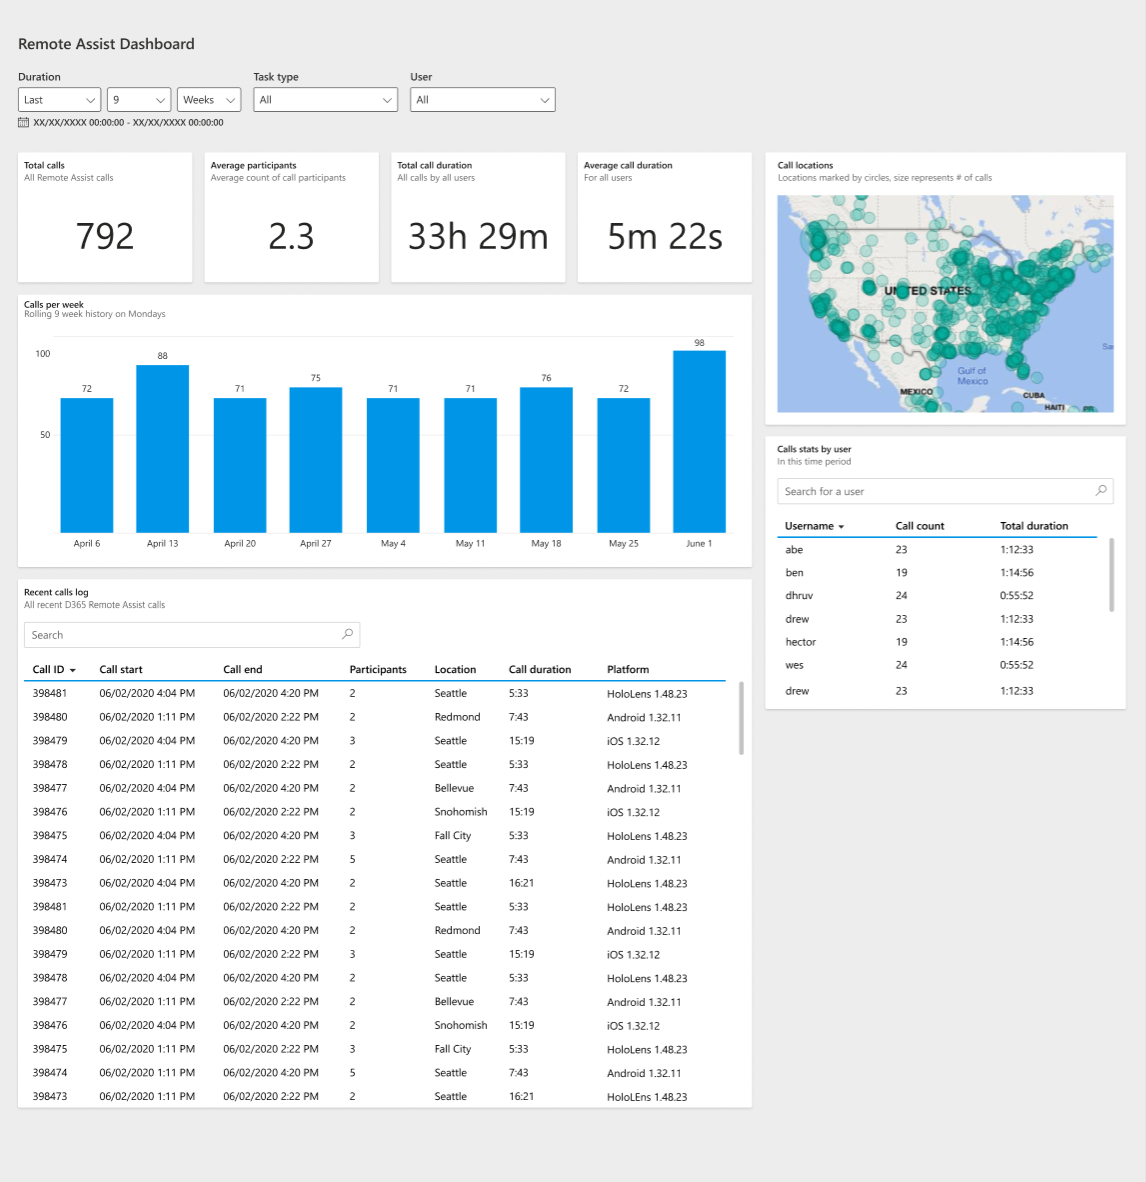 Dynamics 365 Remote Assist calls dashboard as seen in Unified Interface